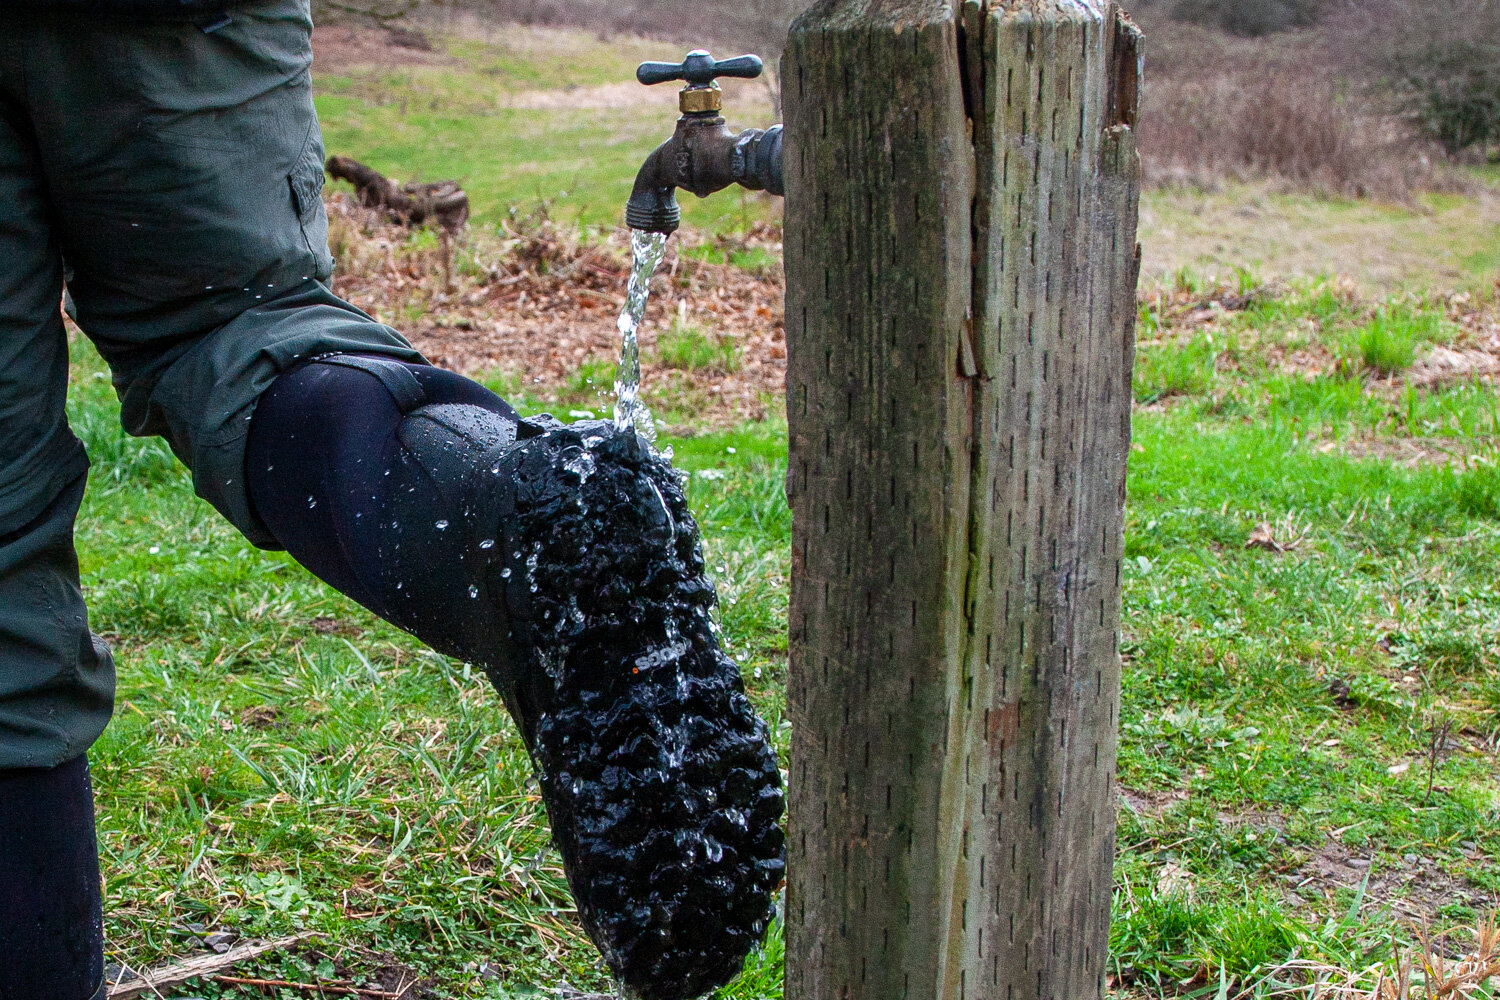 Rain Boots like the Bogs Classic High are easy to clean under running water